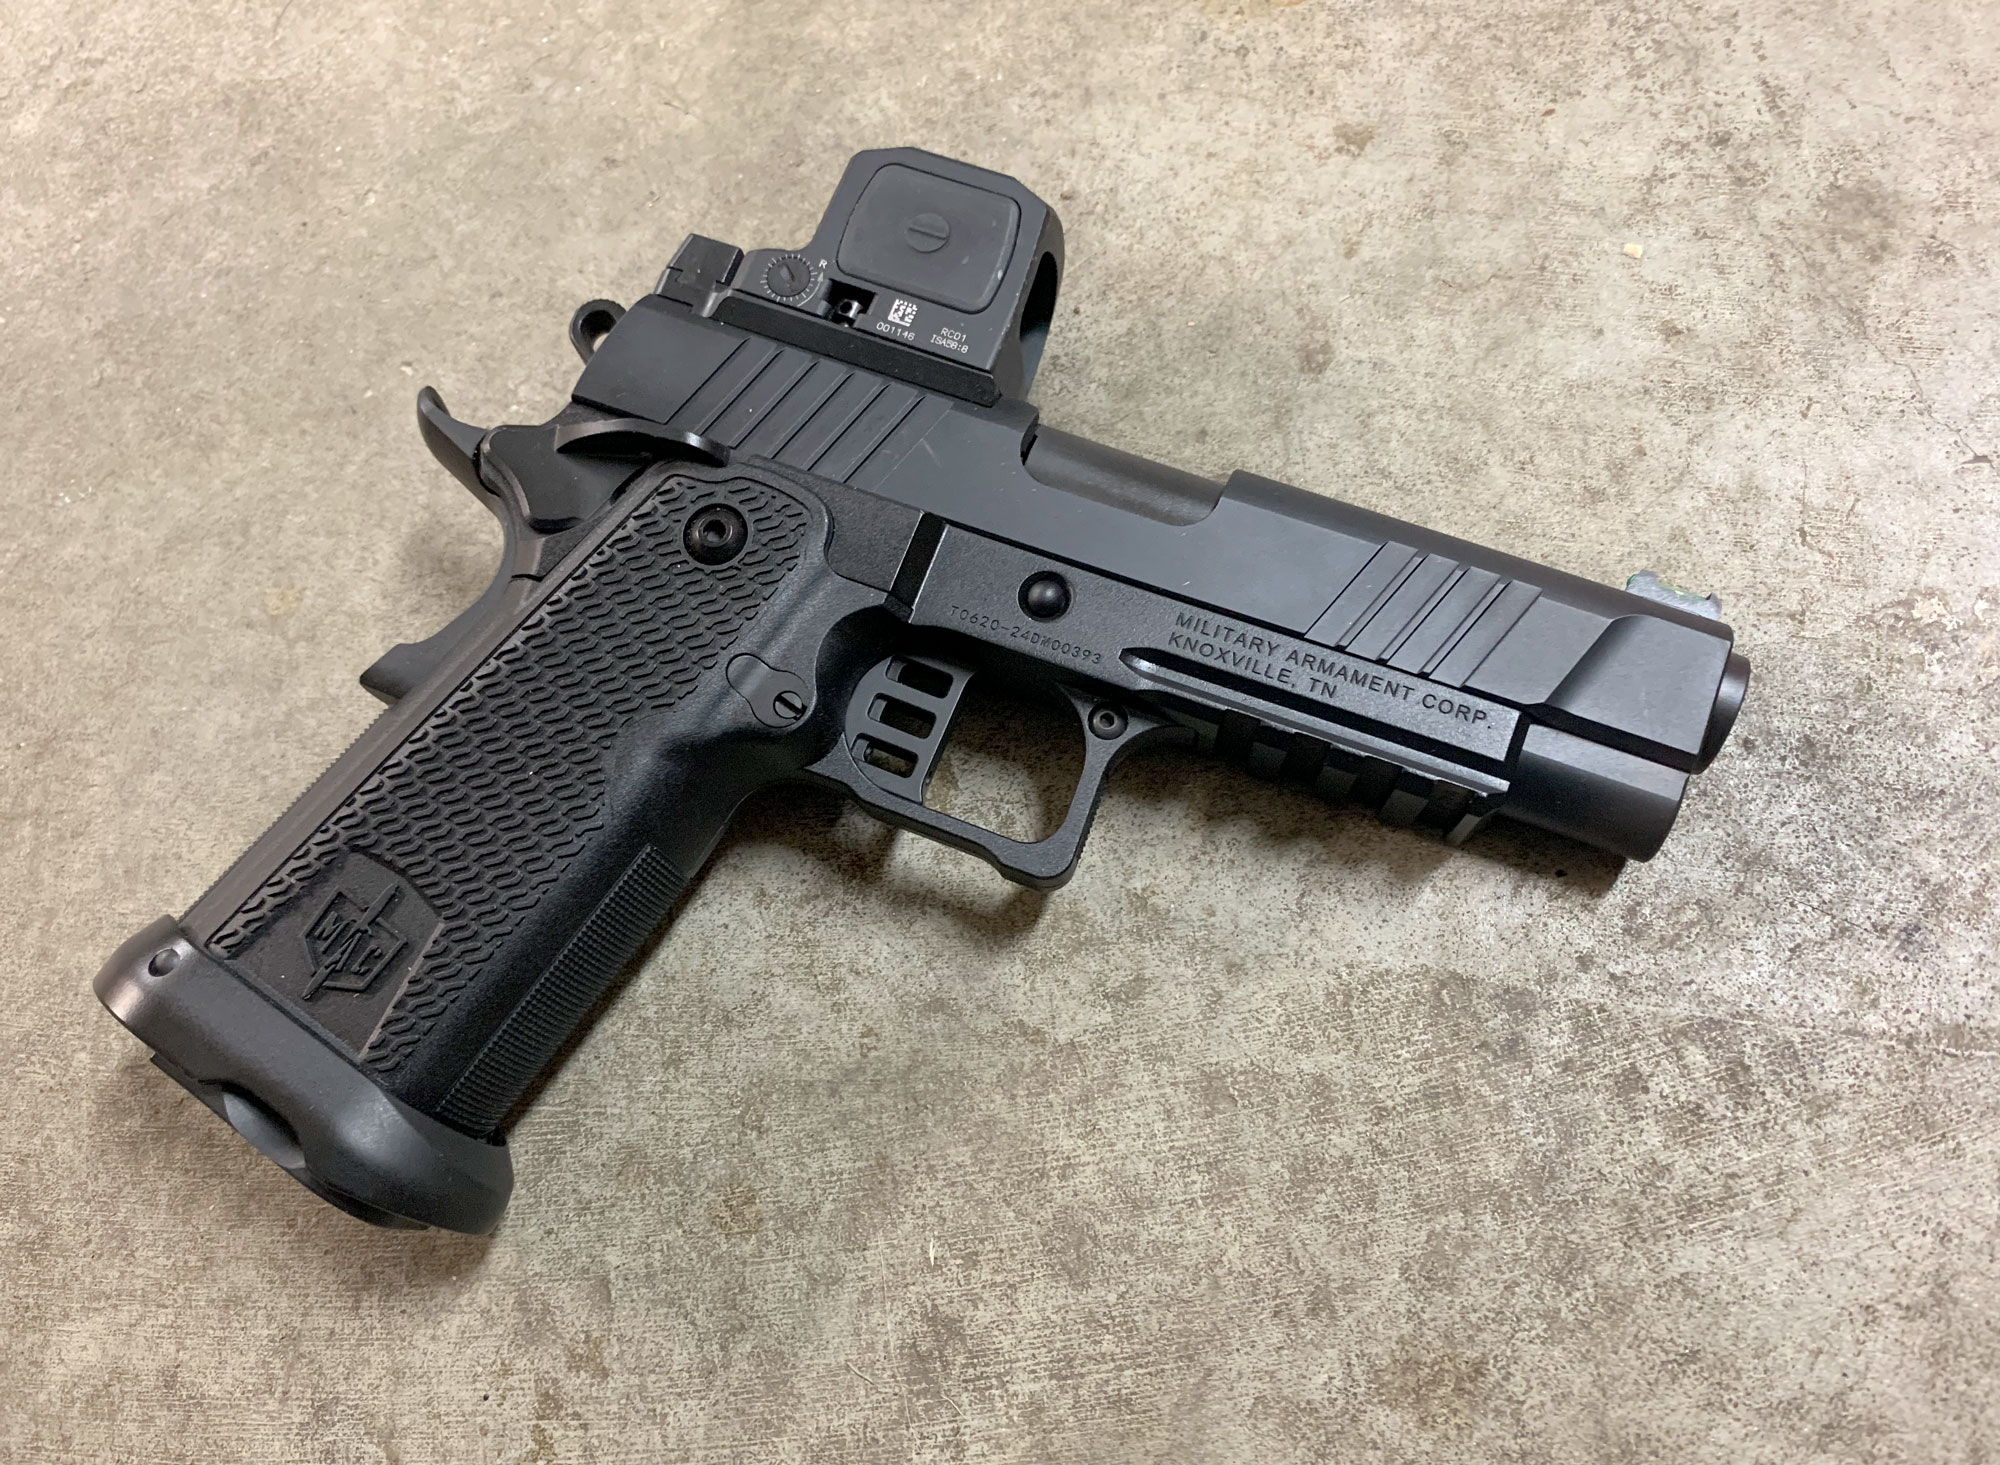 MAC 9 DS double-stack 1911 9mm